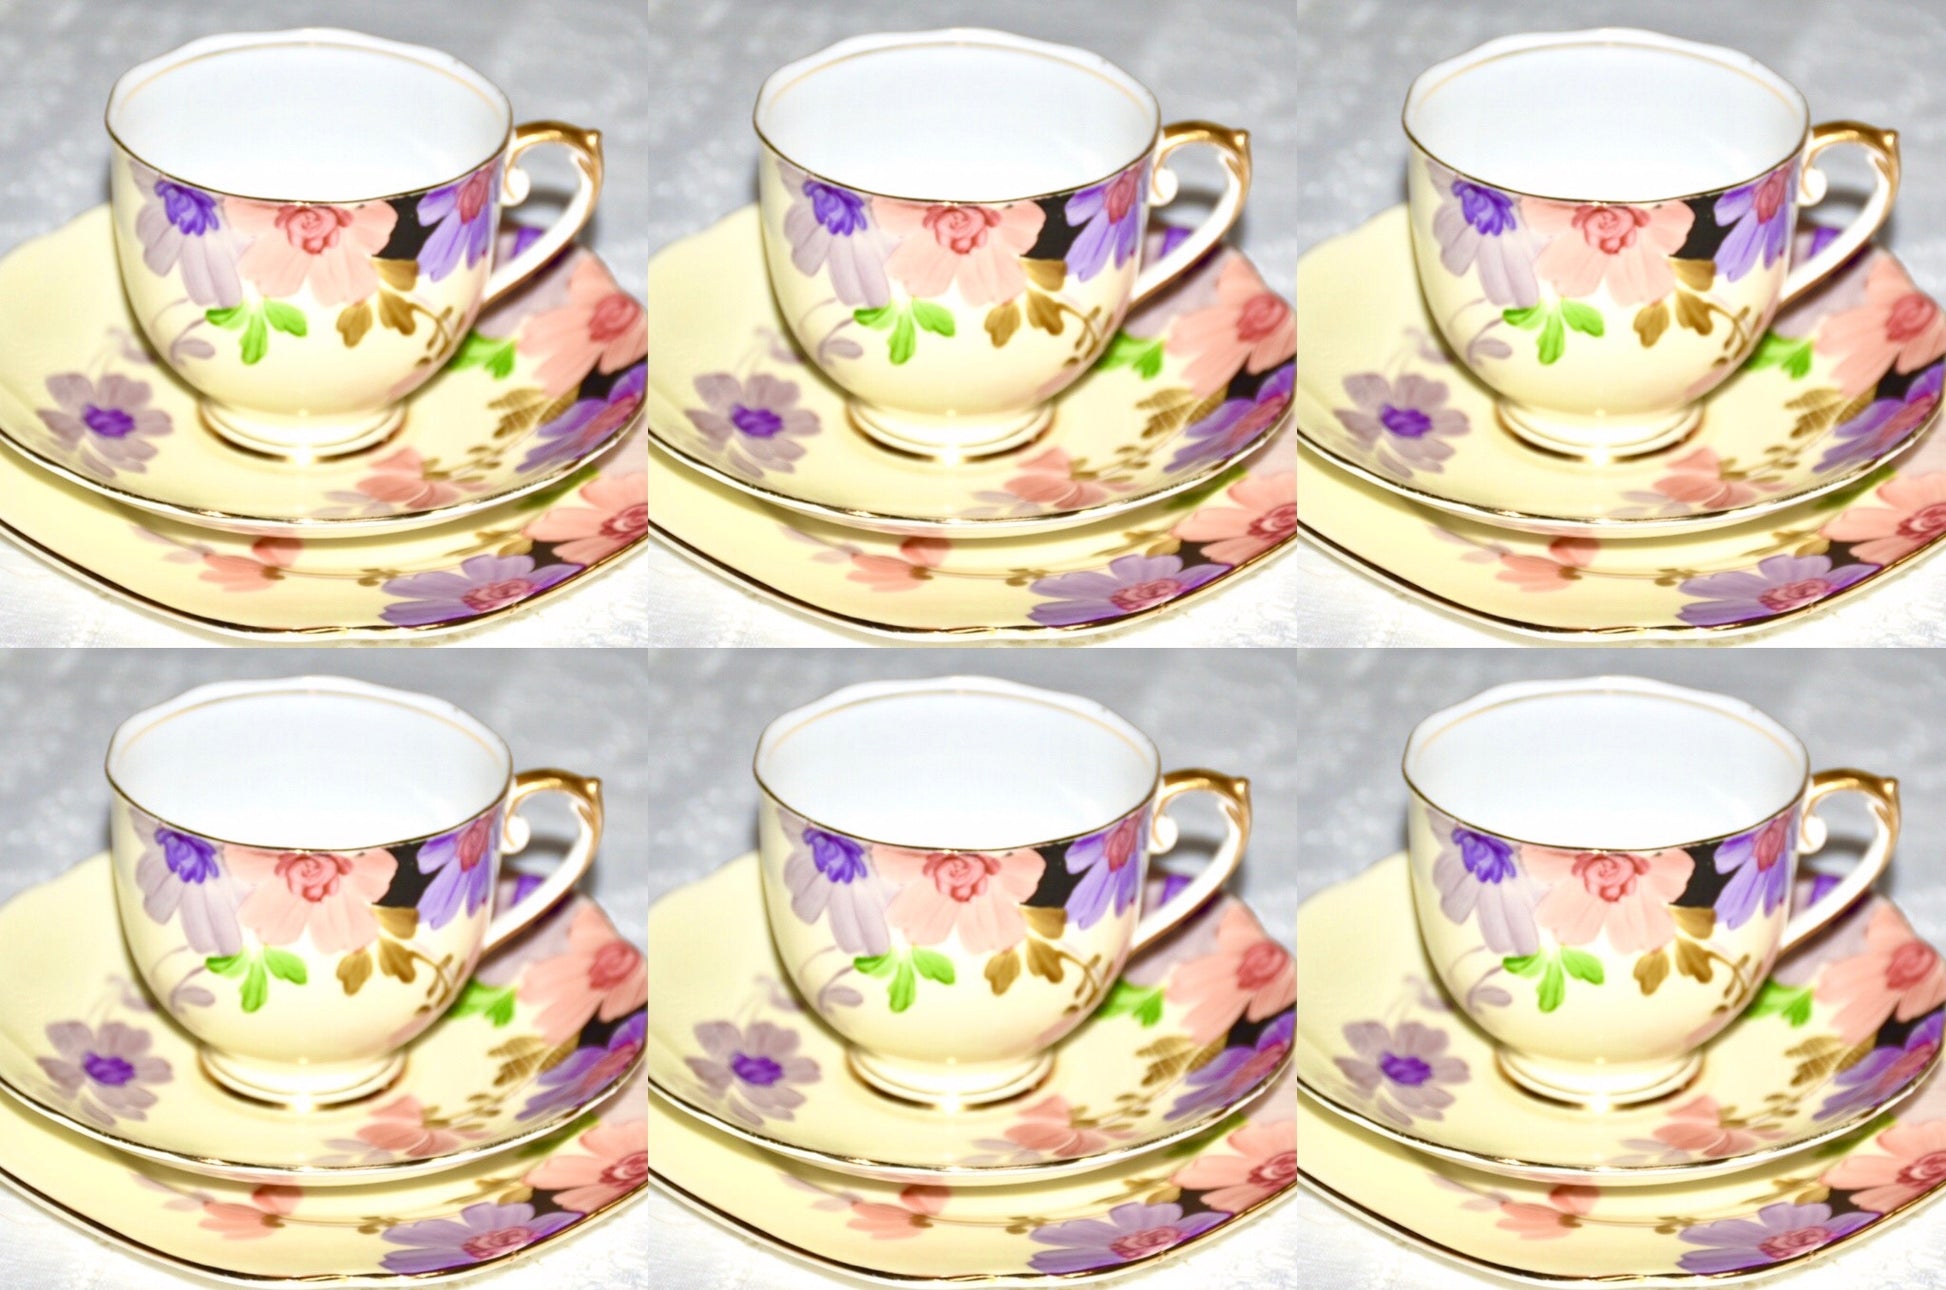 Roslyn Vintage English fine bone china a tea set for 6 people for afternoon tea.  Pink and purple flowers.  Matching tea cups saucers and tea plates with gold trim